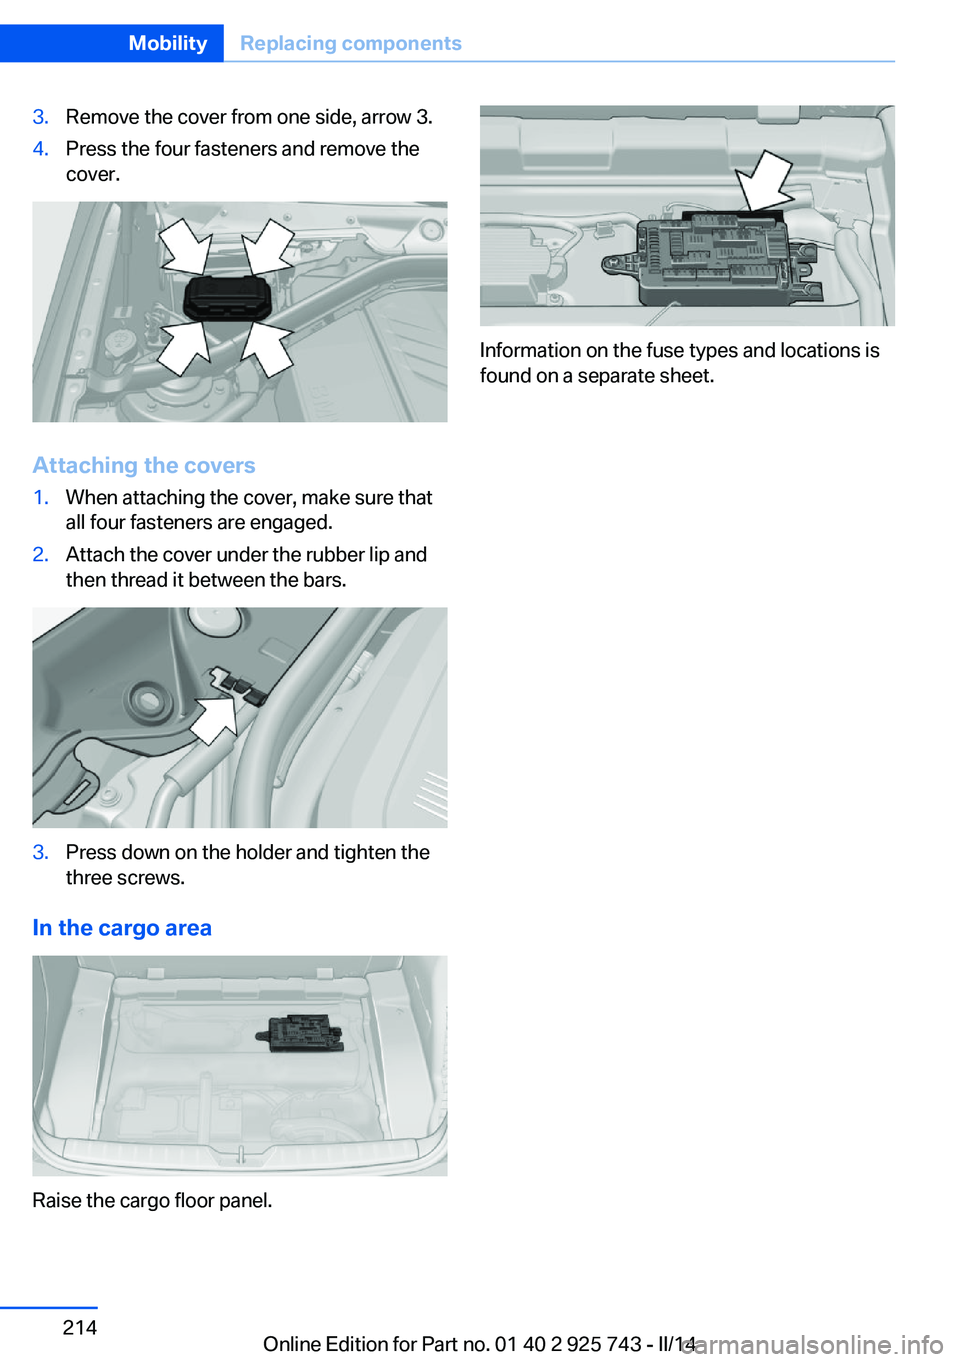 BMW 328D XDRIVE 2014  Owners Manual 3.Remove the cover from one side, arrow 3.4.Press the four fasteners and remove the
cover.
Attaching the covers
1.When attaching the cover, make sure that
all four fasteners are engaged.2.Attach the c